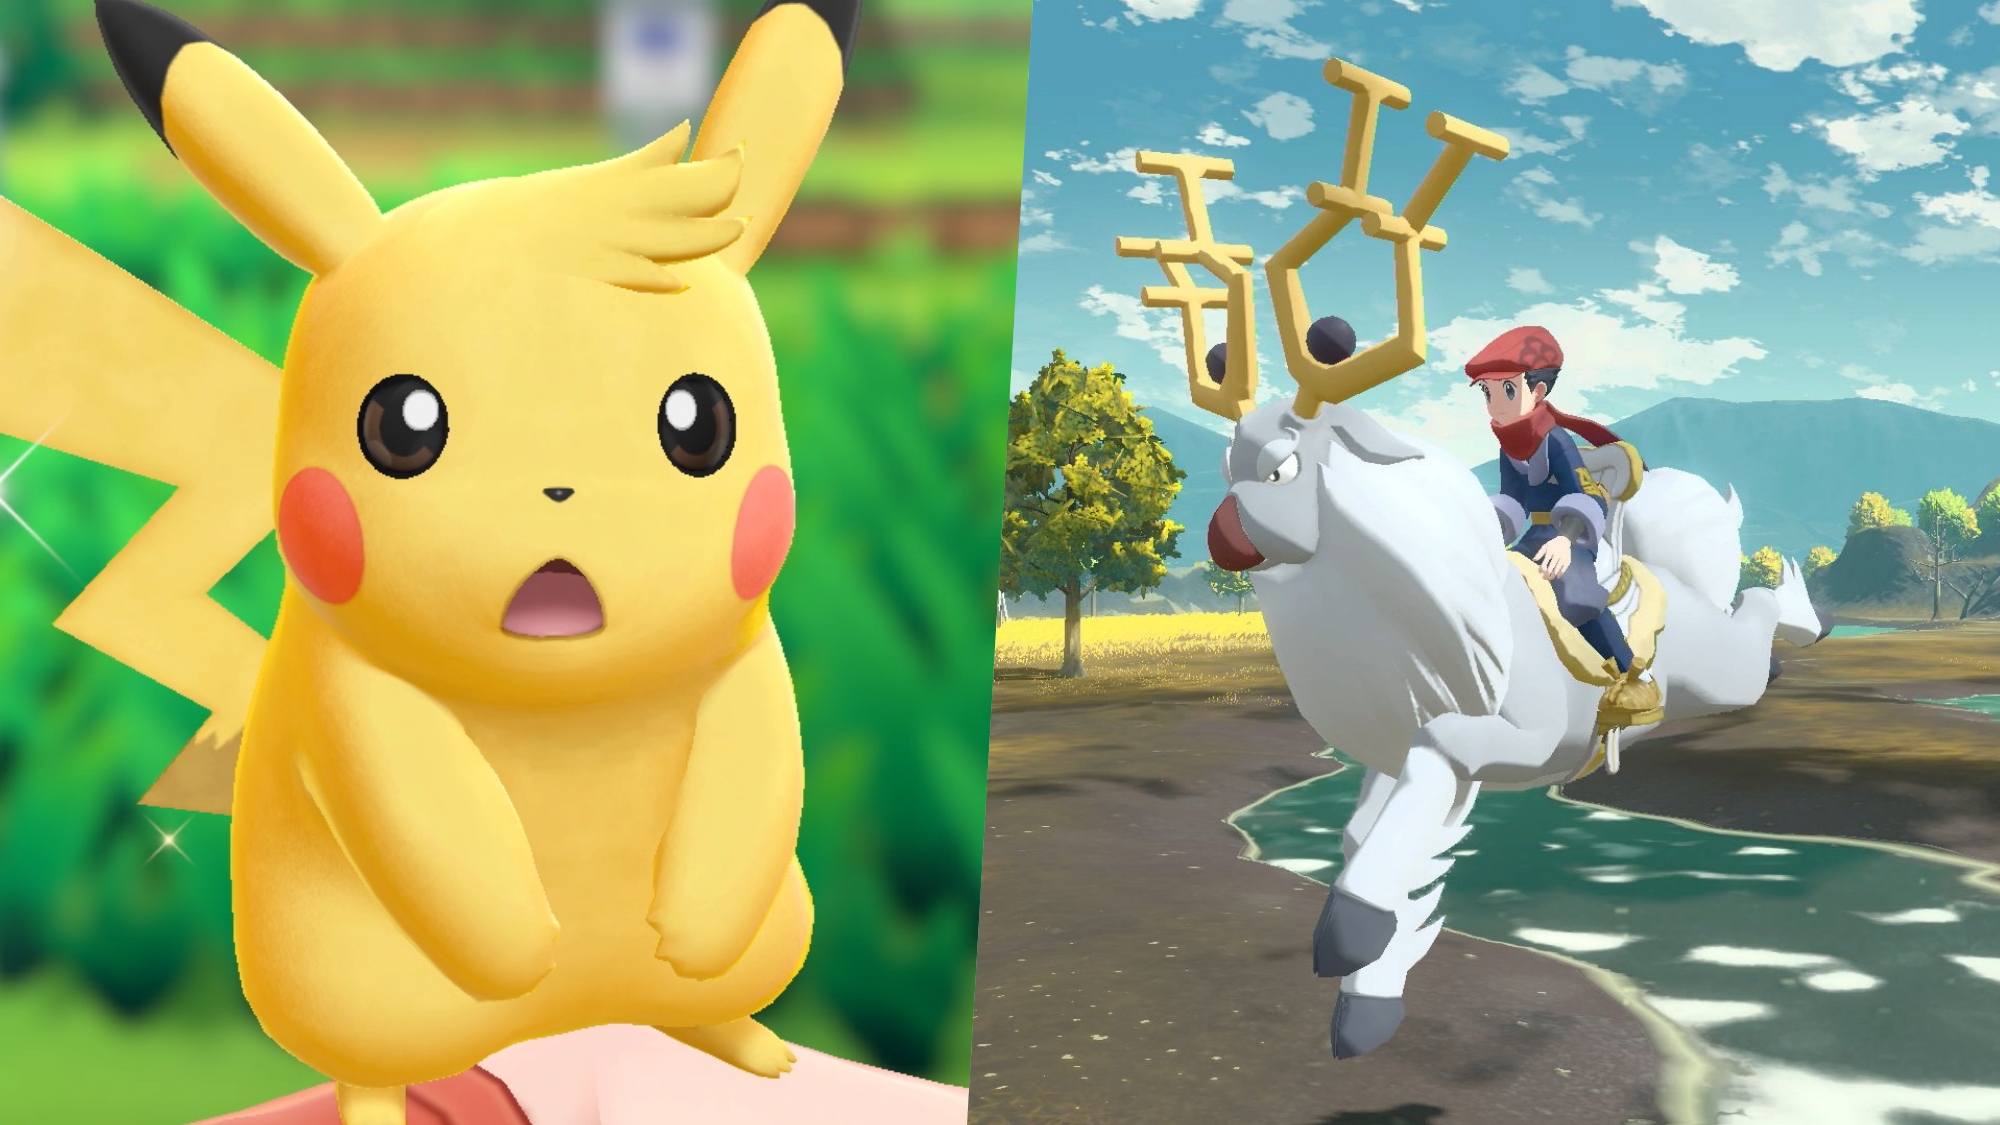 Pokémon gets its own Nintendo Direct later this week, here's 3 things